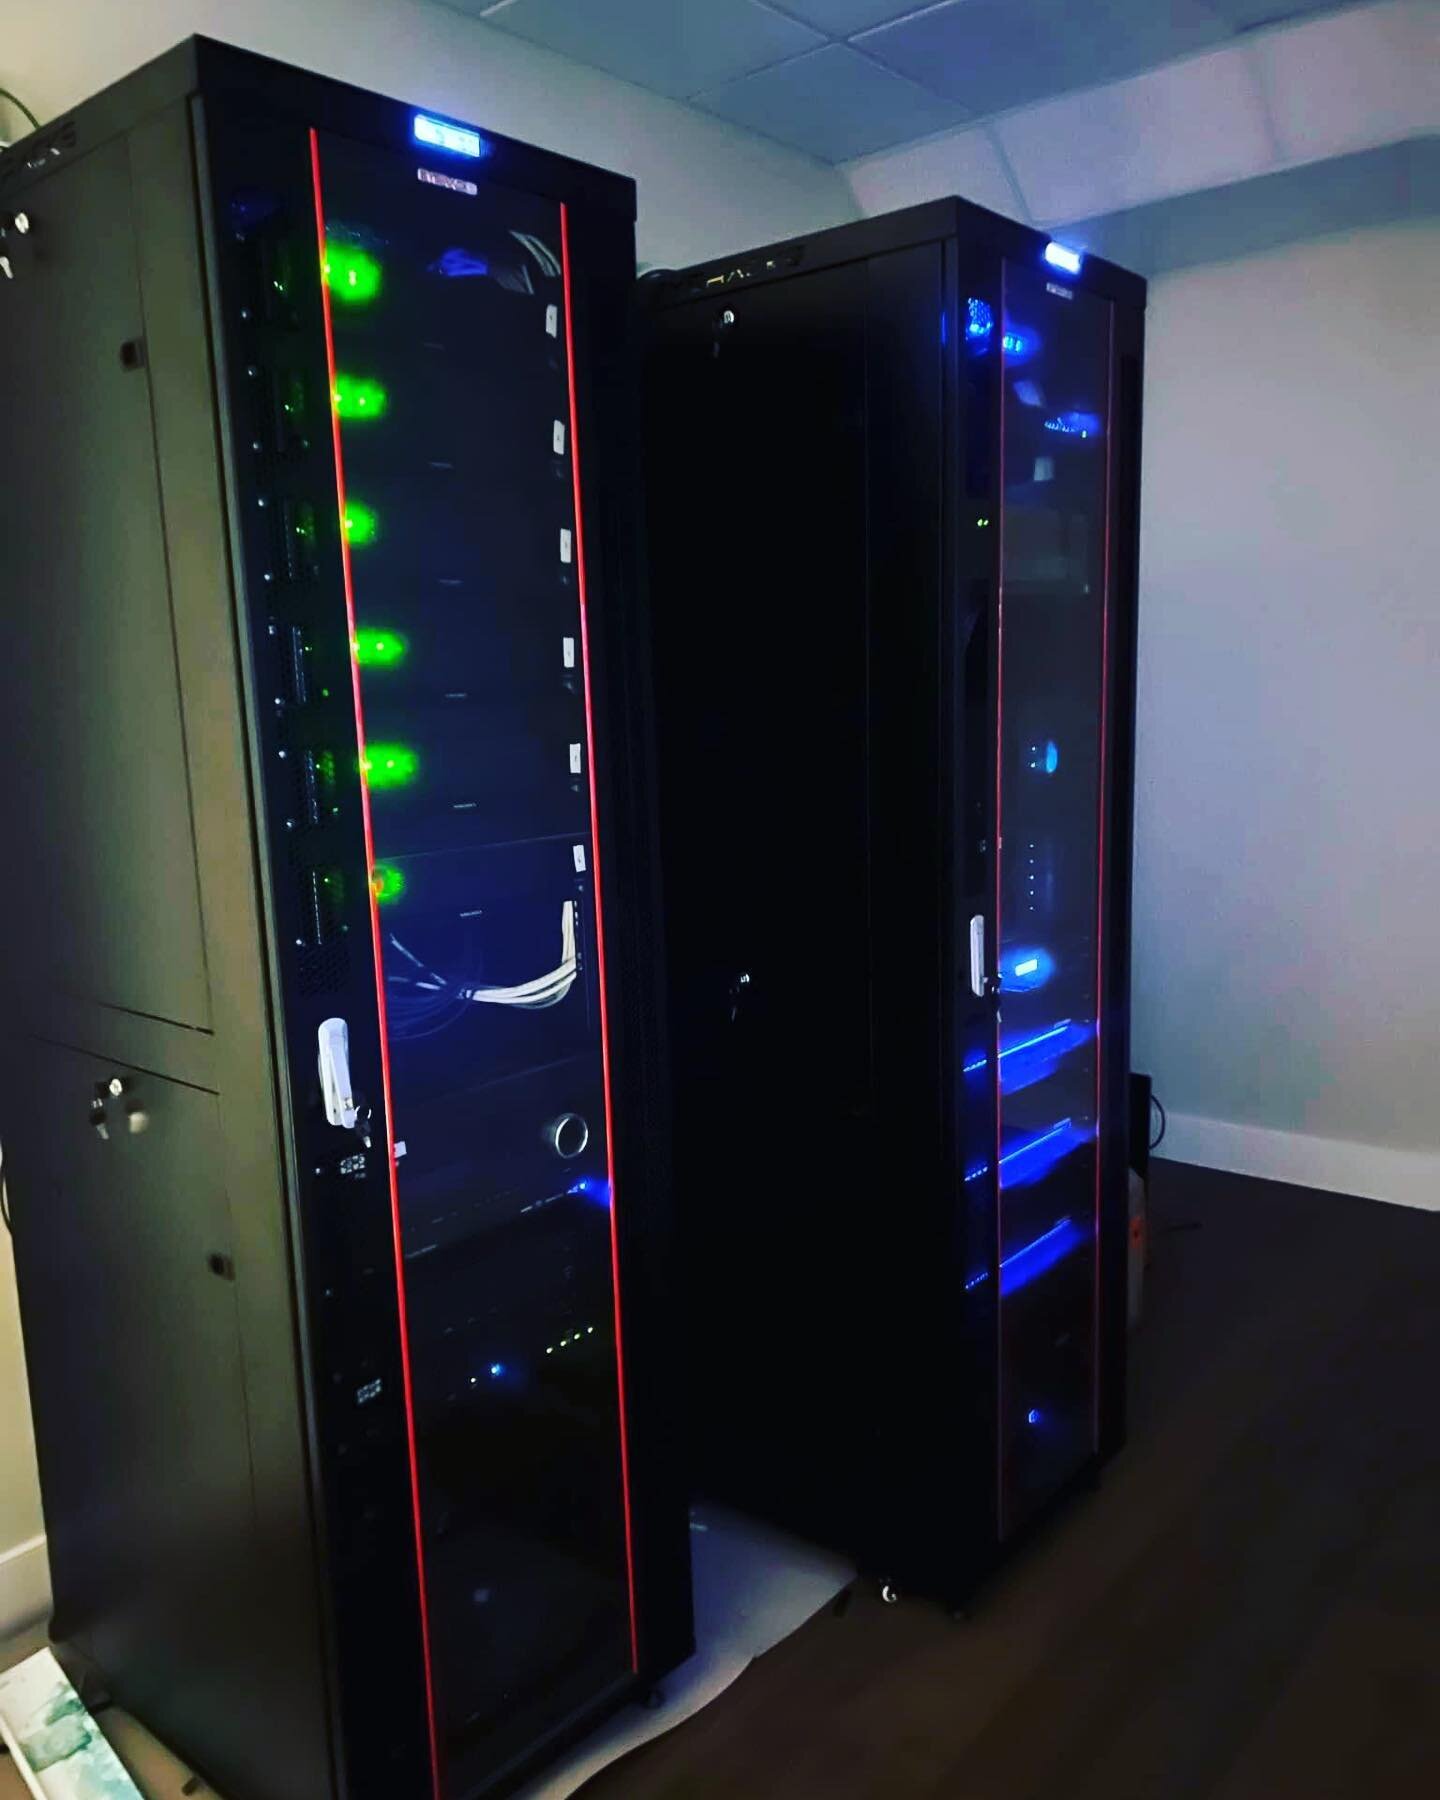 Racking Look and aesthetic is always important.
Beside giving the &ldquo;Racing&rdquo; touch to your Smart home, have a clean rack is essential for future maintenance and upgrade.
Racking must be a compromise of tidiness and accessibility.
Over &ldqu